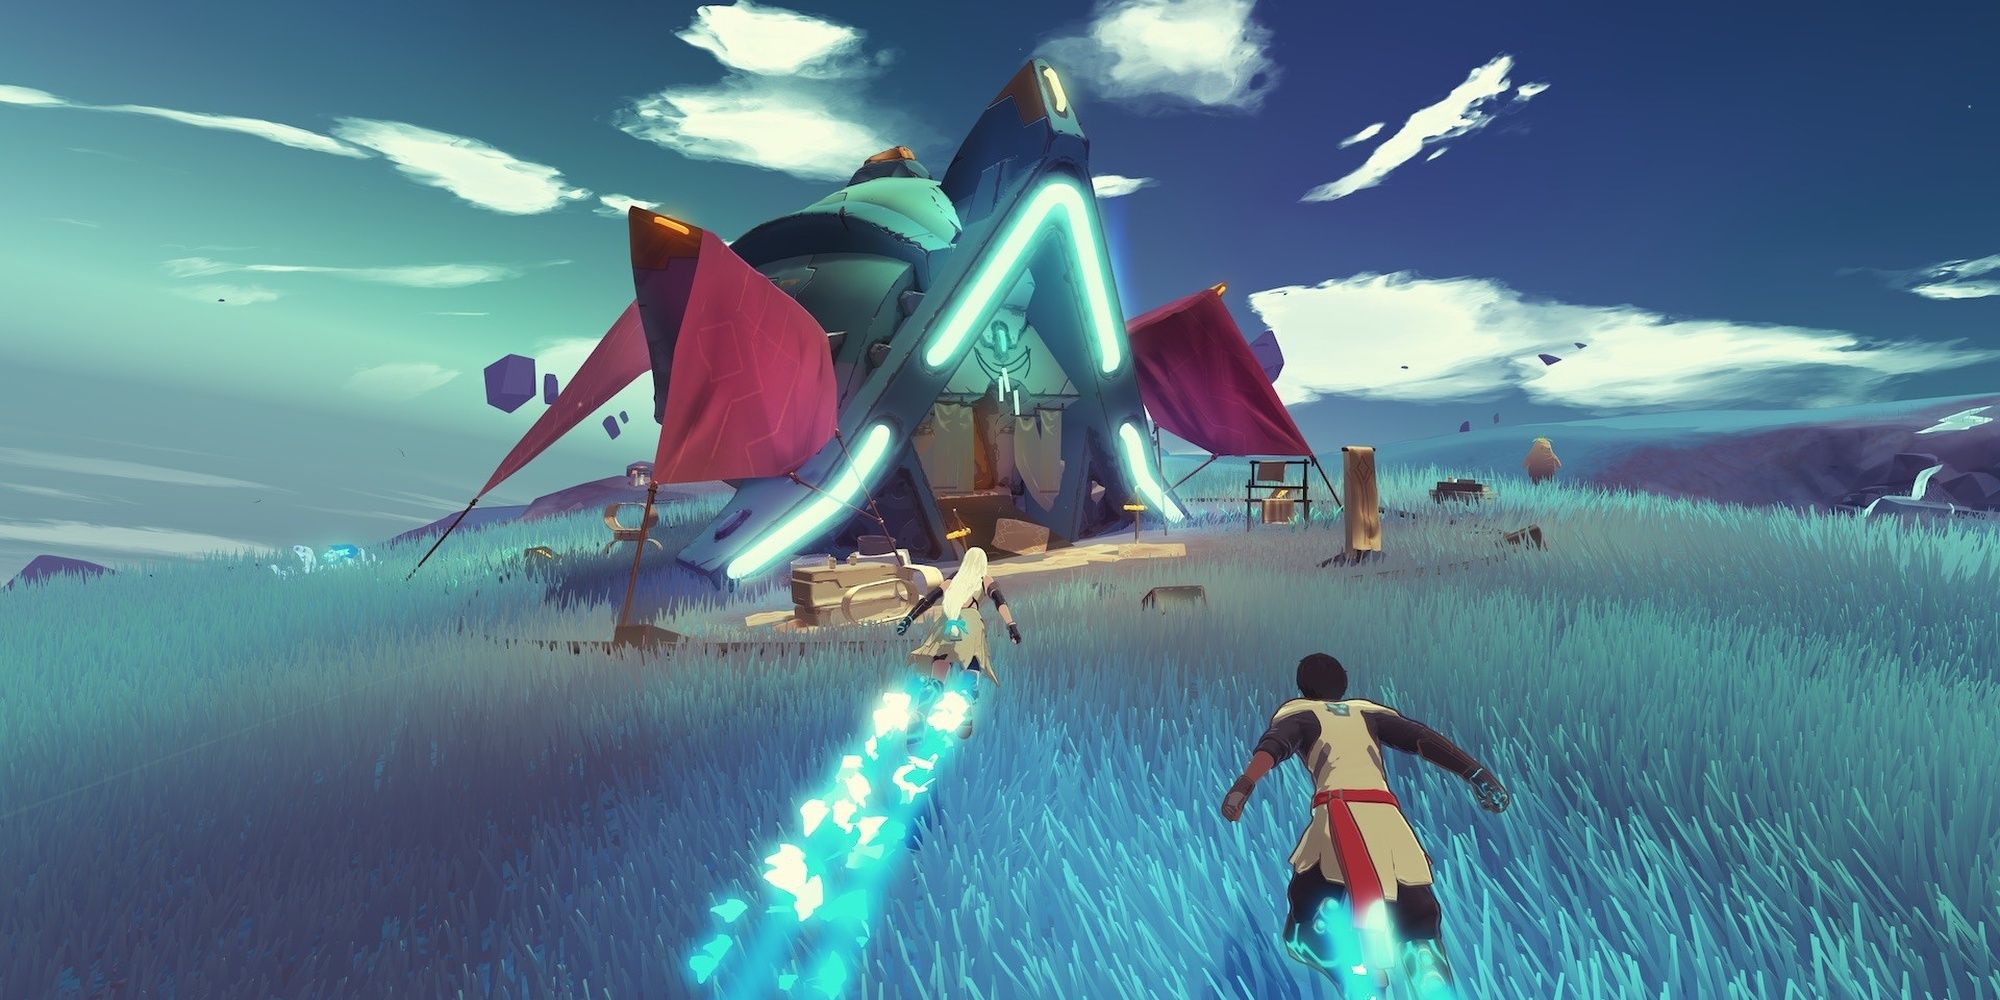 Haven: The Romantic Couple Using Their Energy Powers To Fly Across A Blue Field